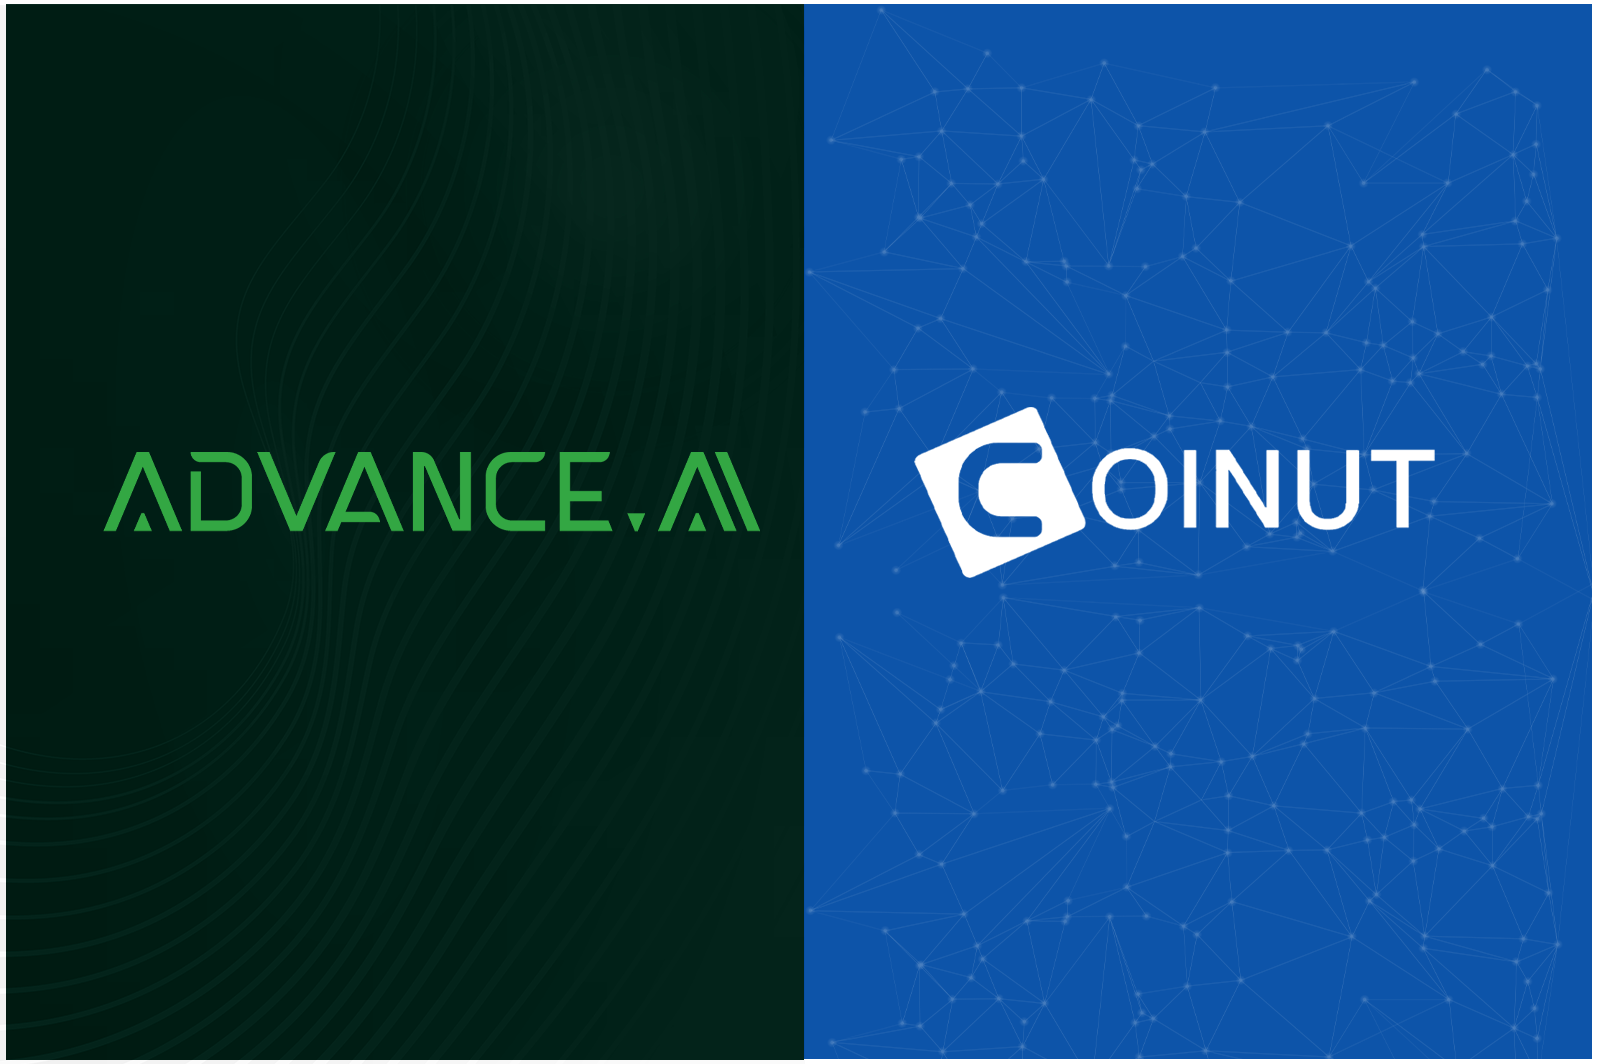 Crypto exchange platform Coinut partners ADVANCE.AI to scale global user growth